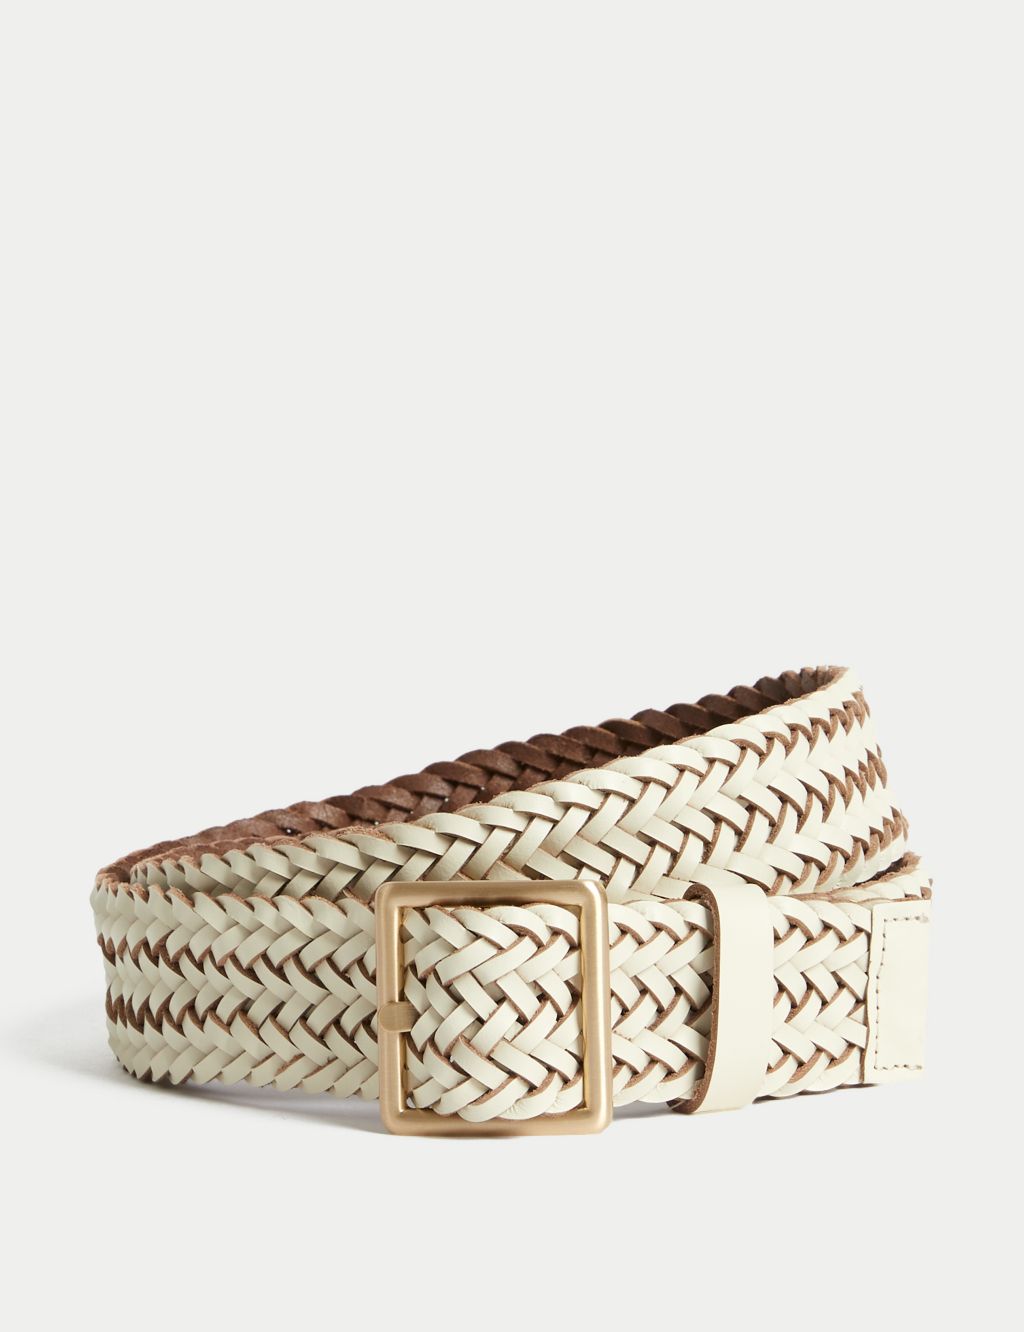 Leather Woven Jeans Belt image 1